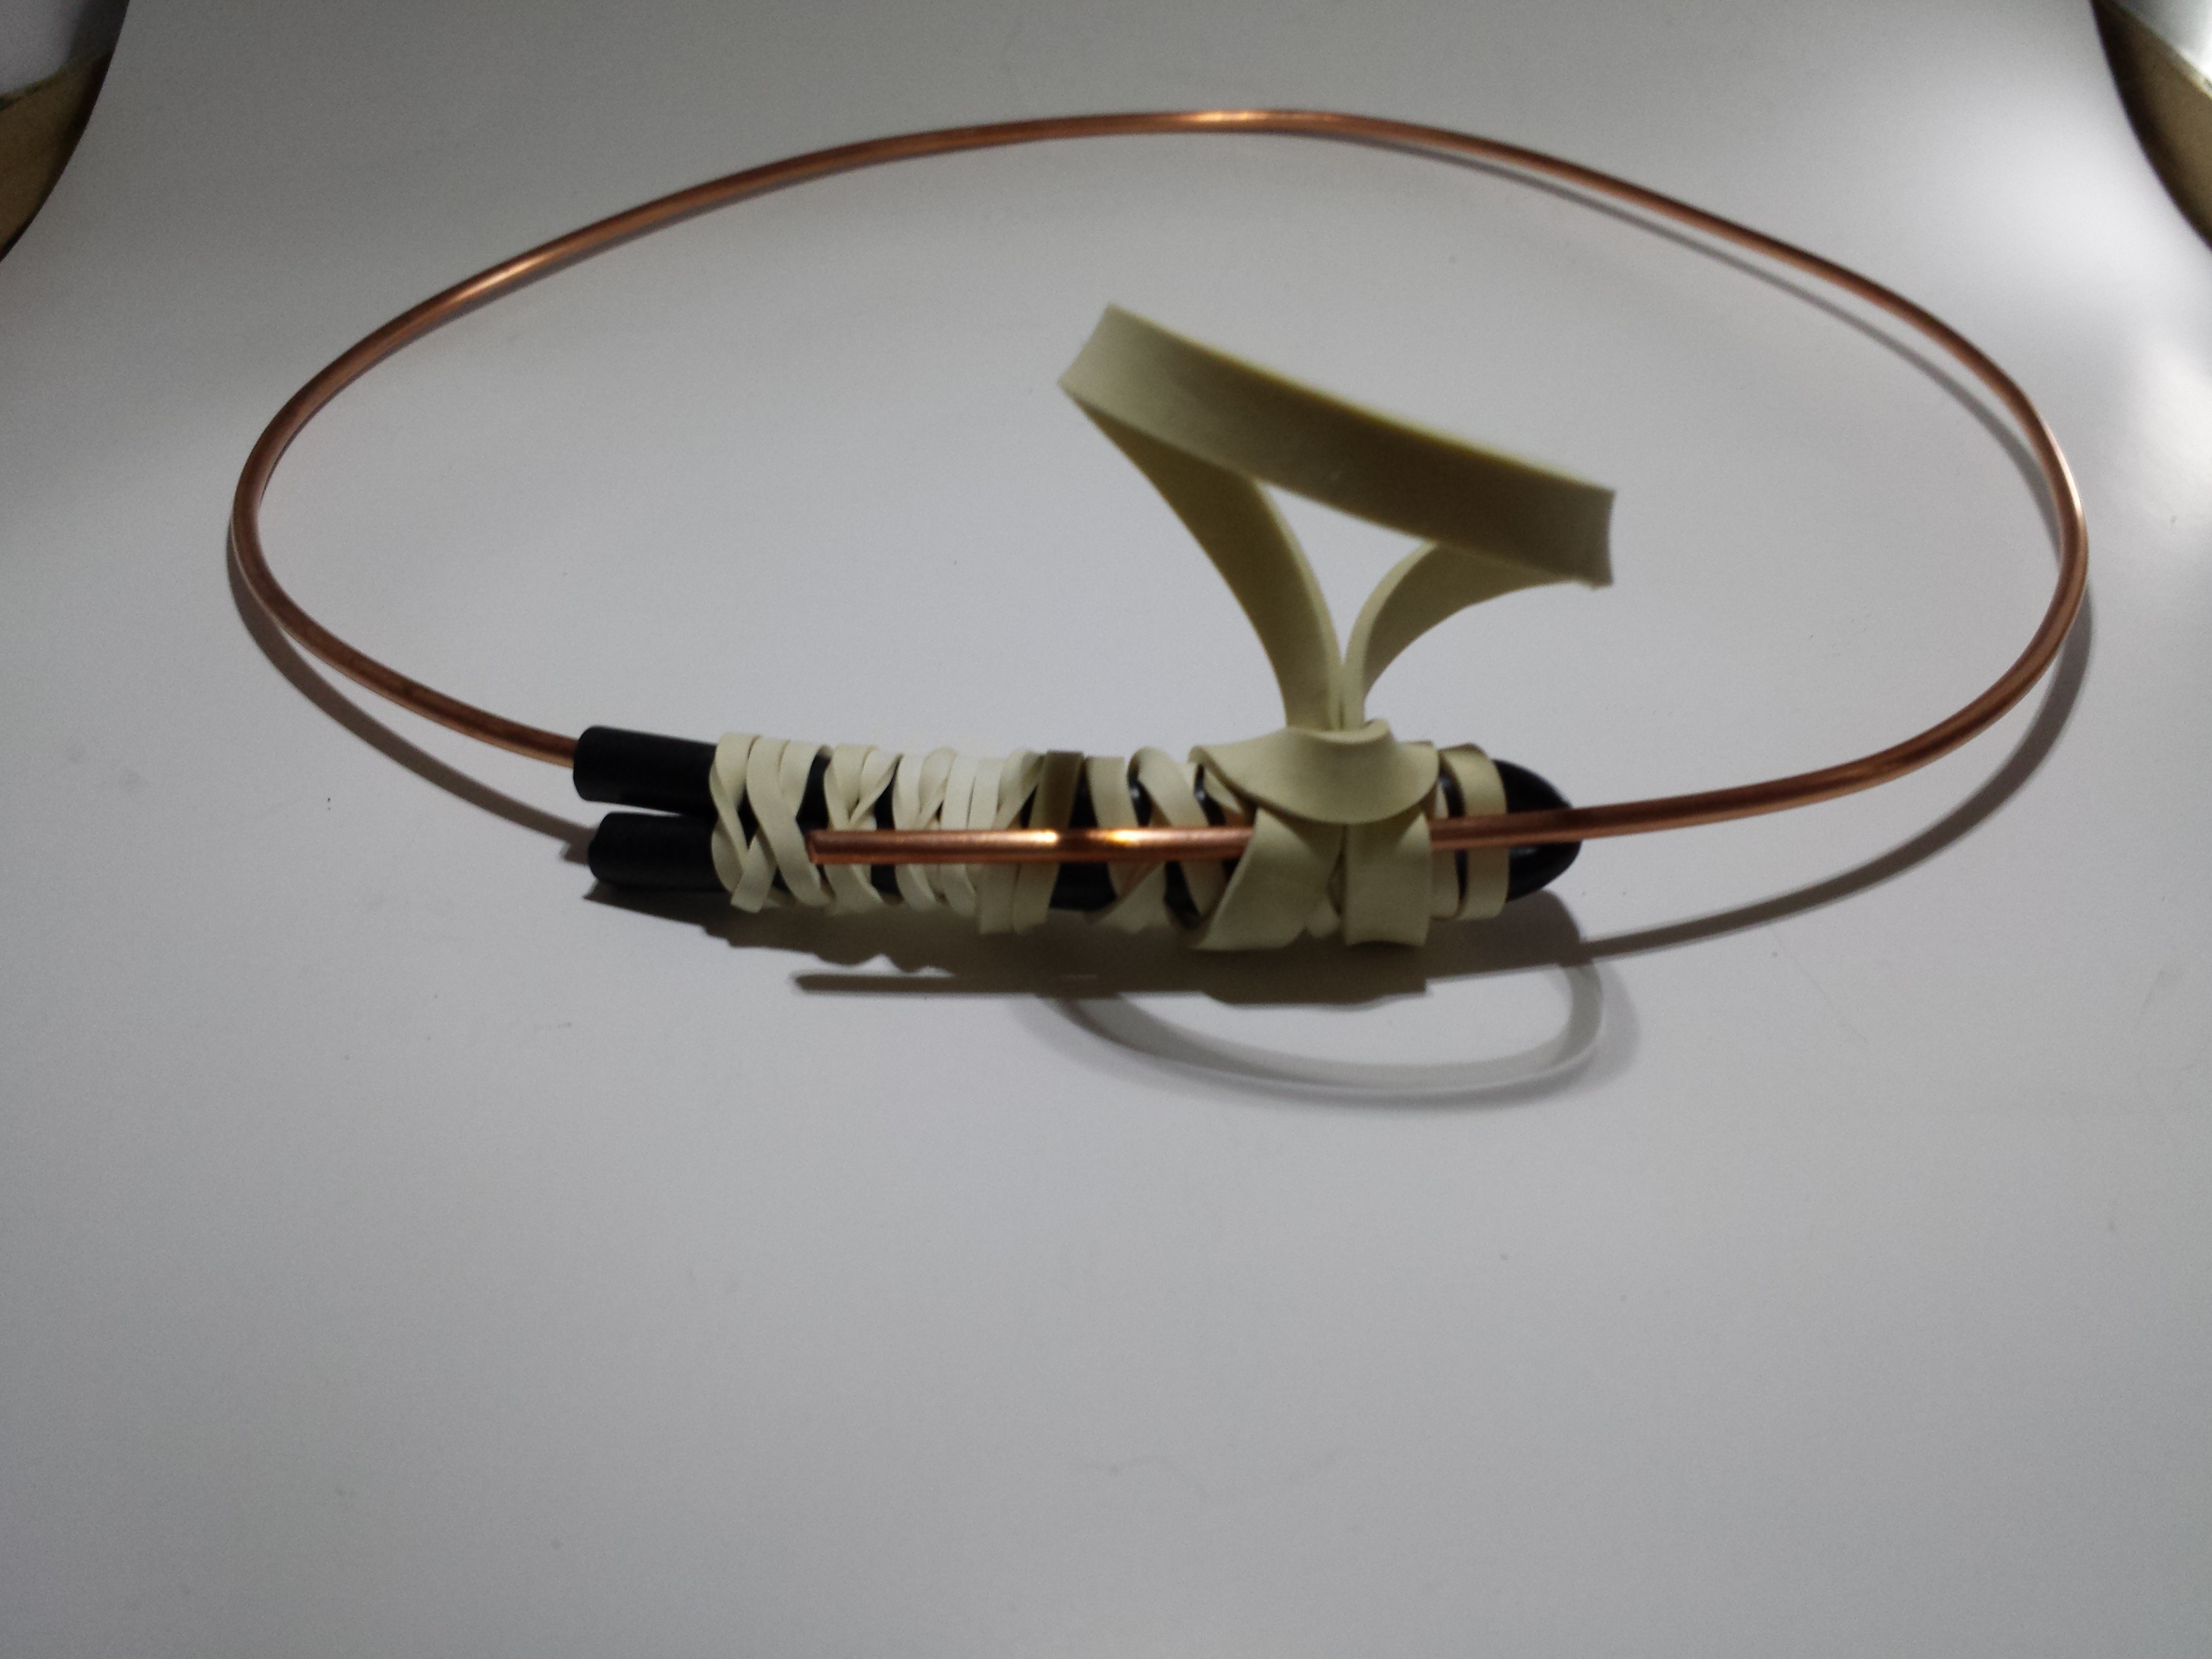 copper wire showing how to secure with rubber band